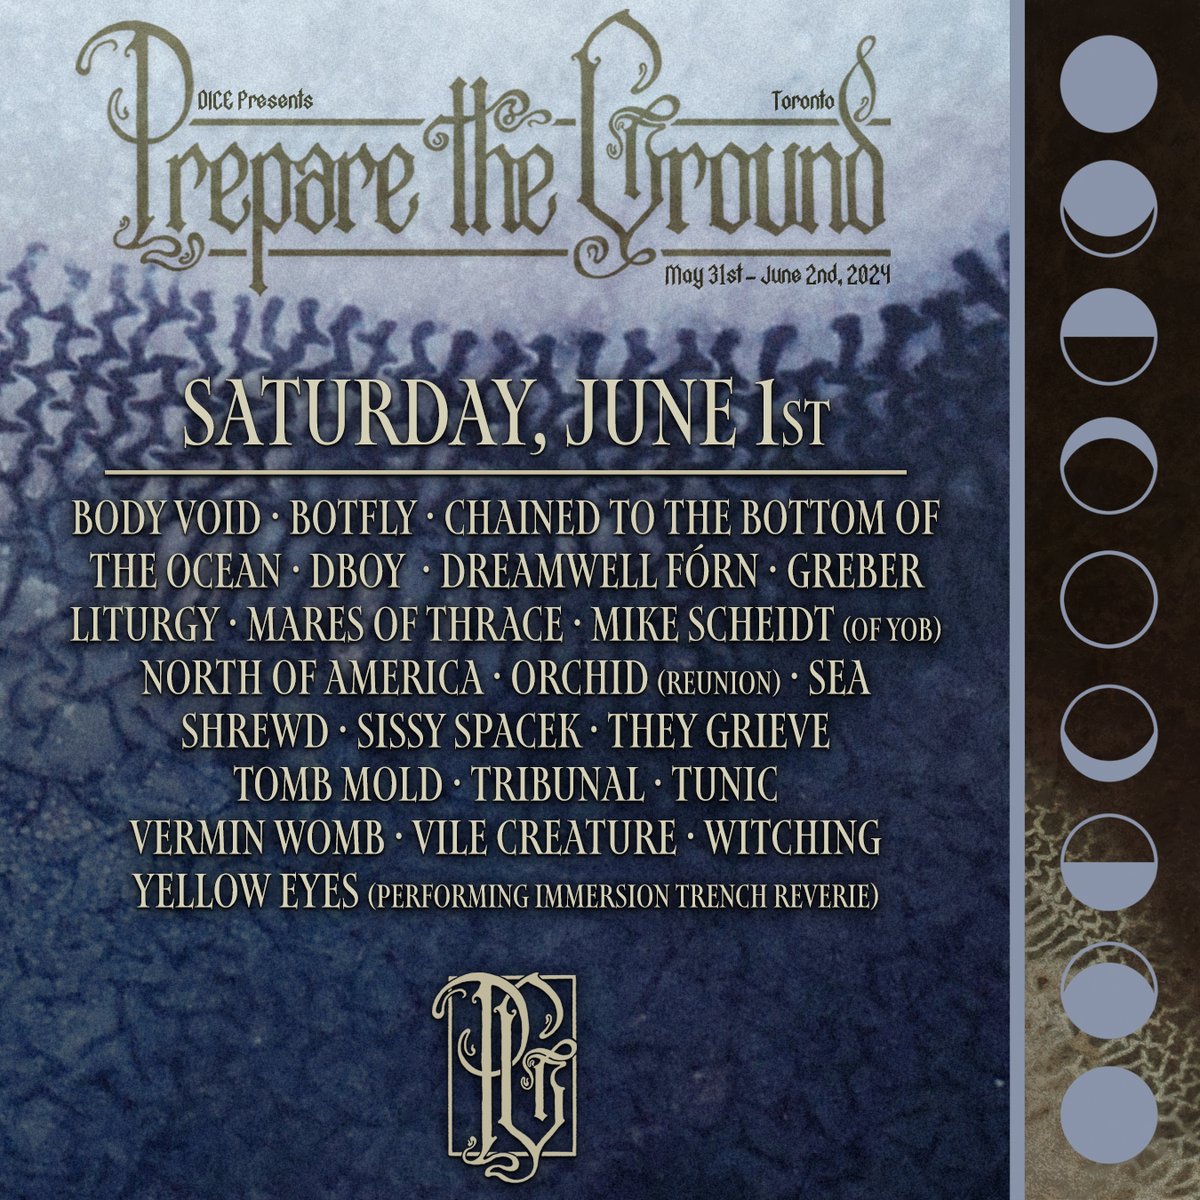 Mike will be performing at Prepare The Ground in Toronto this summer. Don’t miss his solo set at the festival, he headlines The Garrison on Saturday, June 1st.